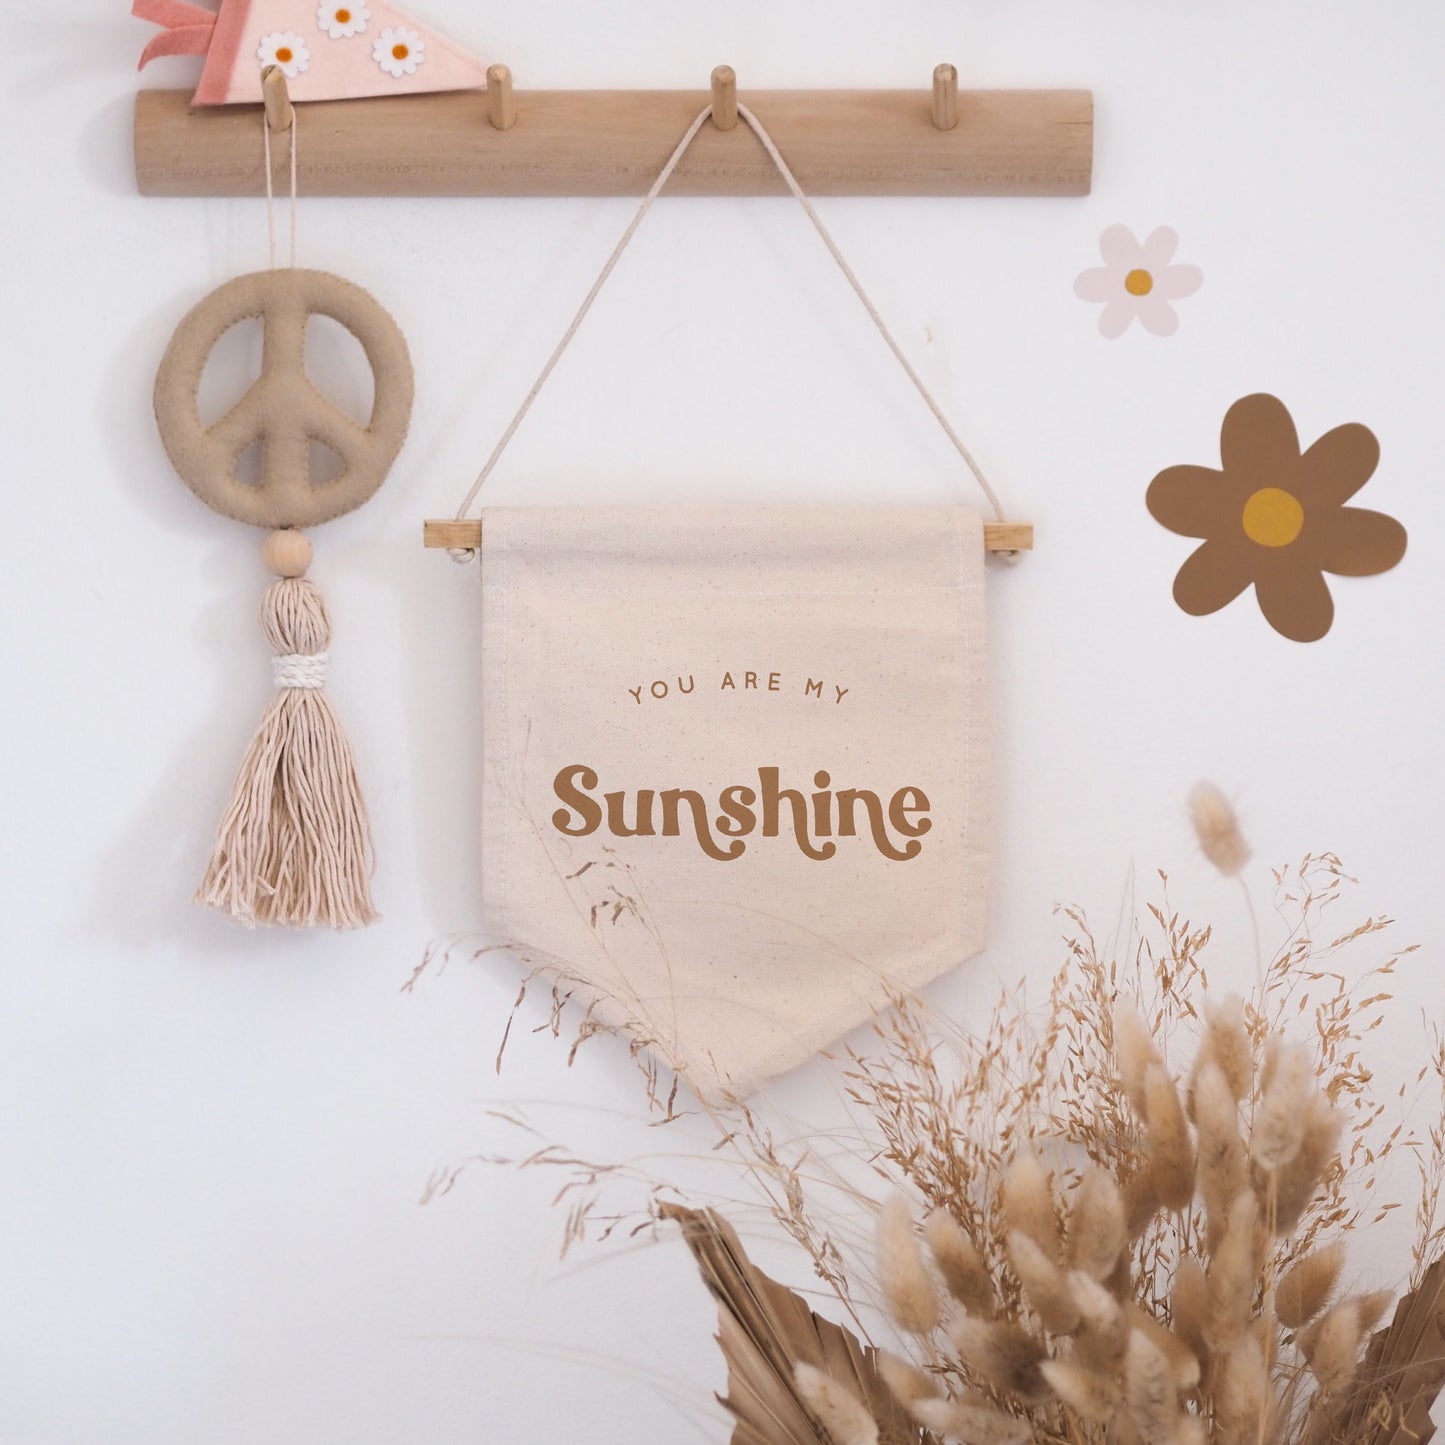 You Are My Sunshine Hanging Banner - Choose from Classic or Rectangle Banner Shape